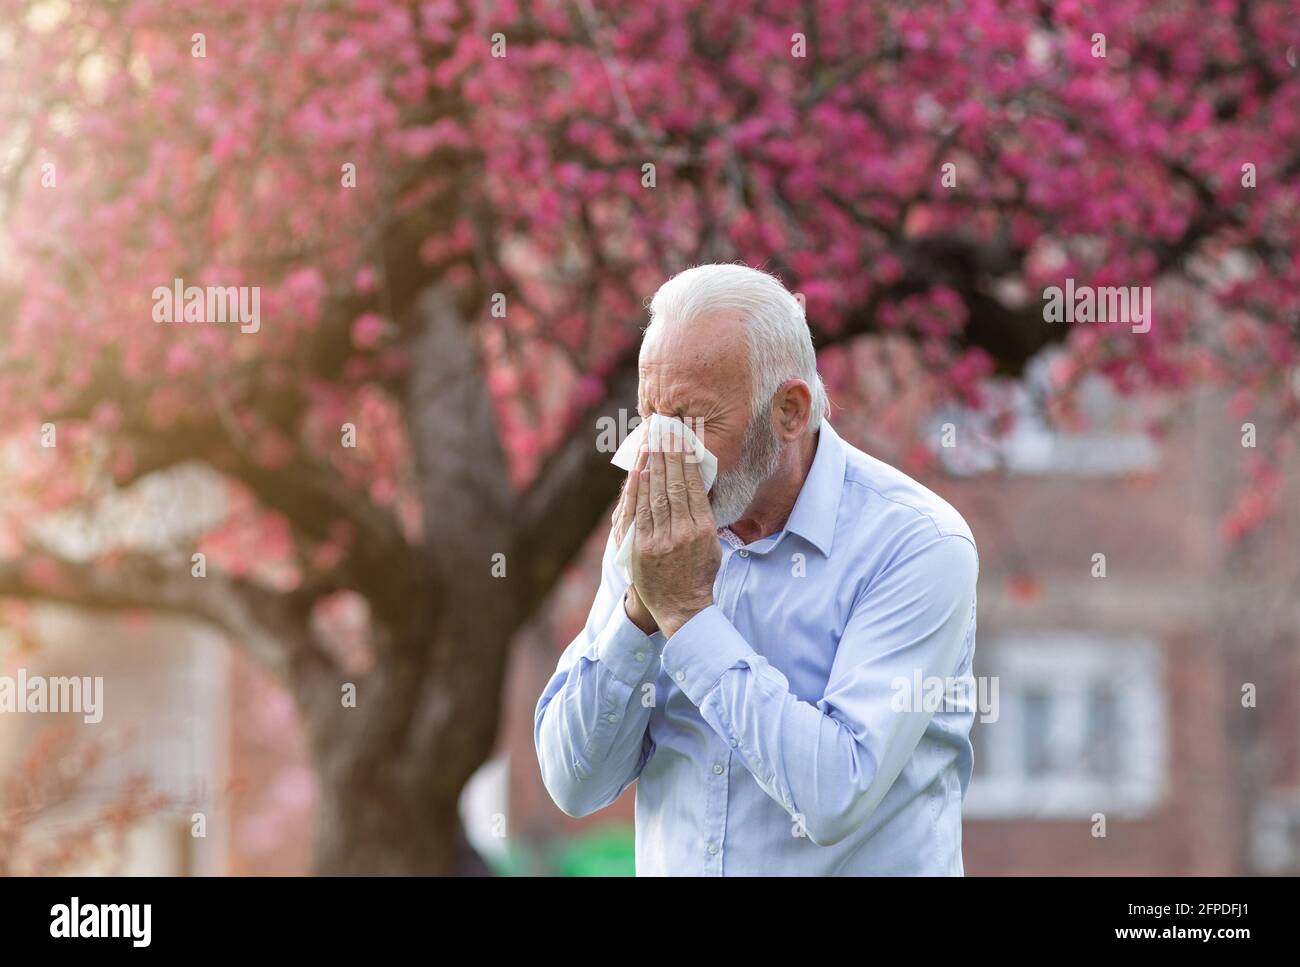 Senior man coughing into handkerchief tissue. Elderly persn suffering from hay fever rhinitis. Stock Photo